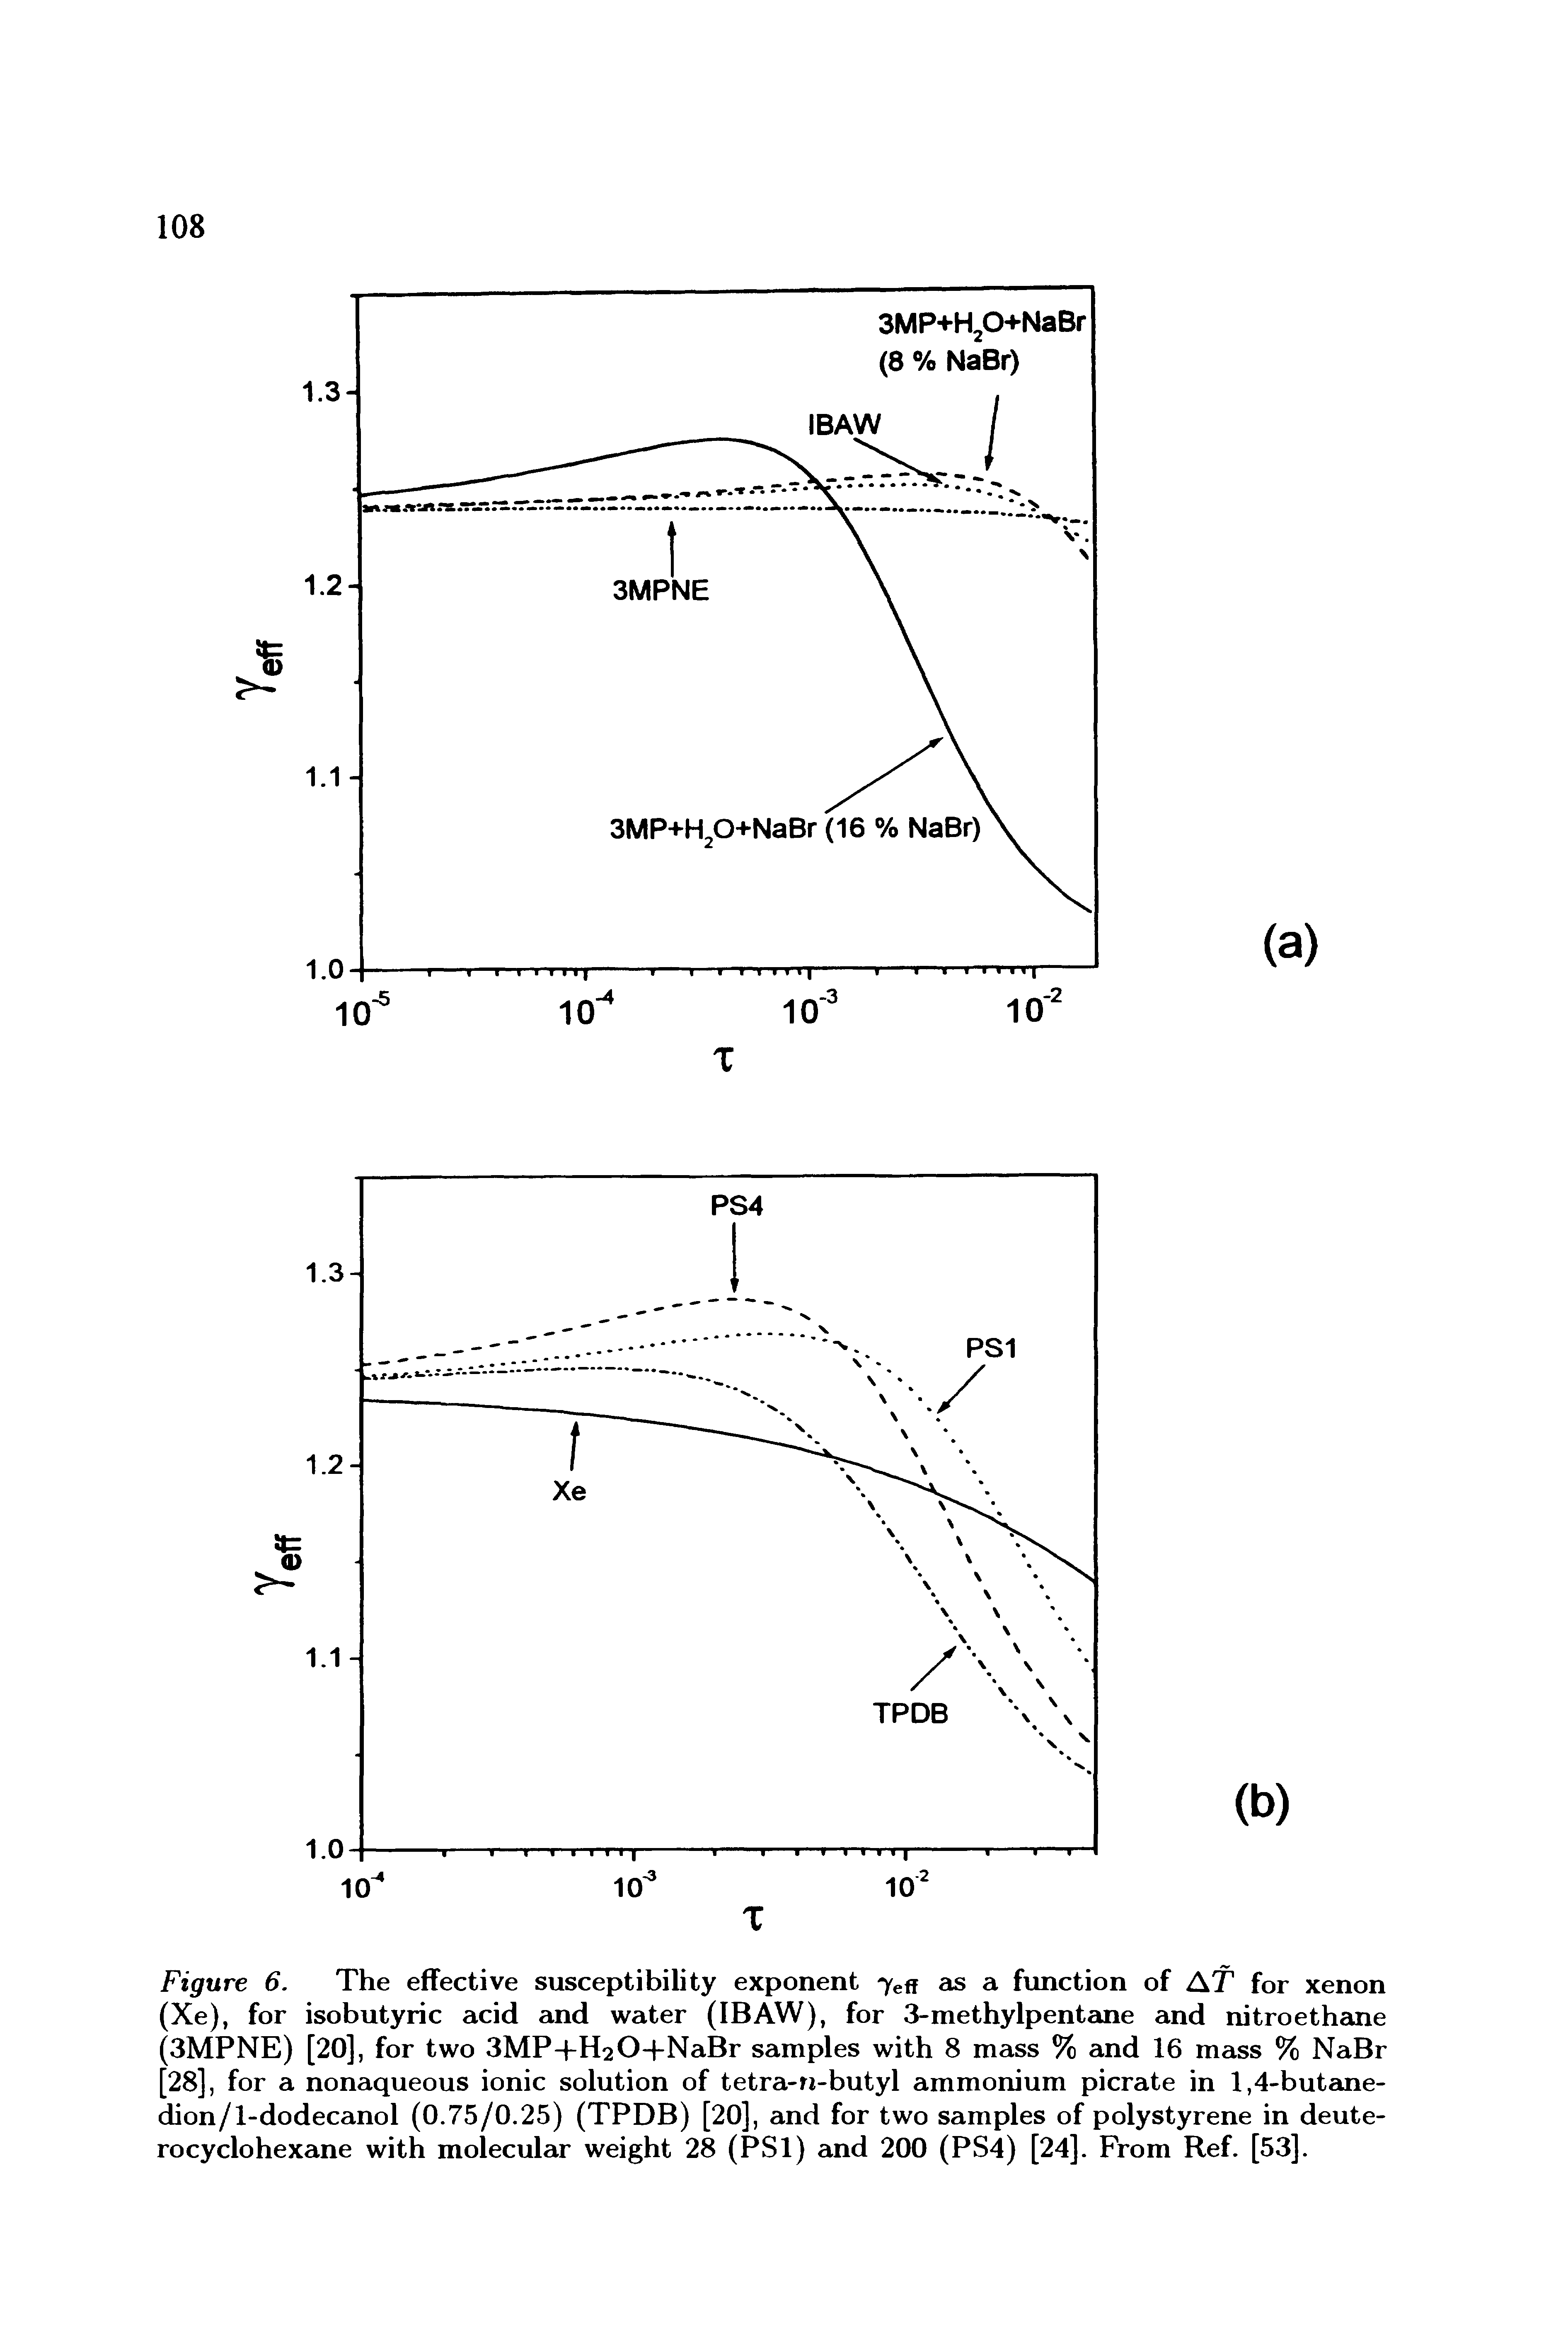 Figure 6. The effective susceptibility exponent as a function of AT for xenon (Xe), for isobutyric acid and water (IBAW), for 3-methylpentane and nitroethane (3MPNE) [20], for two 3MP+H20-j-NaBr samples with 8 mass % and 16 mass % NaBr [28], for a nonaqueous ionic solution of tetra-u-butyl ammonium picrate in 1,4-butane-dion/l-dodecanol (0.75/0.25) (TPDB) [20], and for two samples of polystyrene in deute-rocyclohexane with molecular weight 28 (PSl) and 200 (PS4) [24]. From Ref. [53].